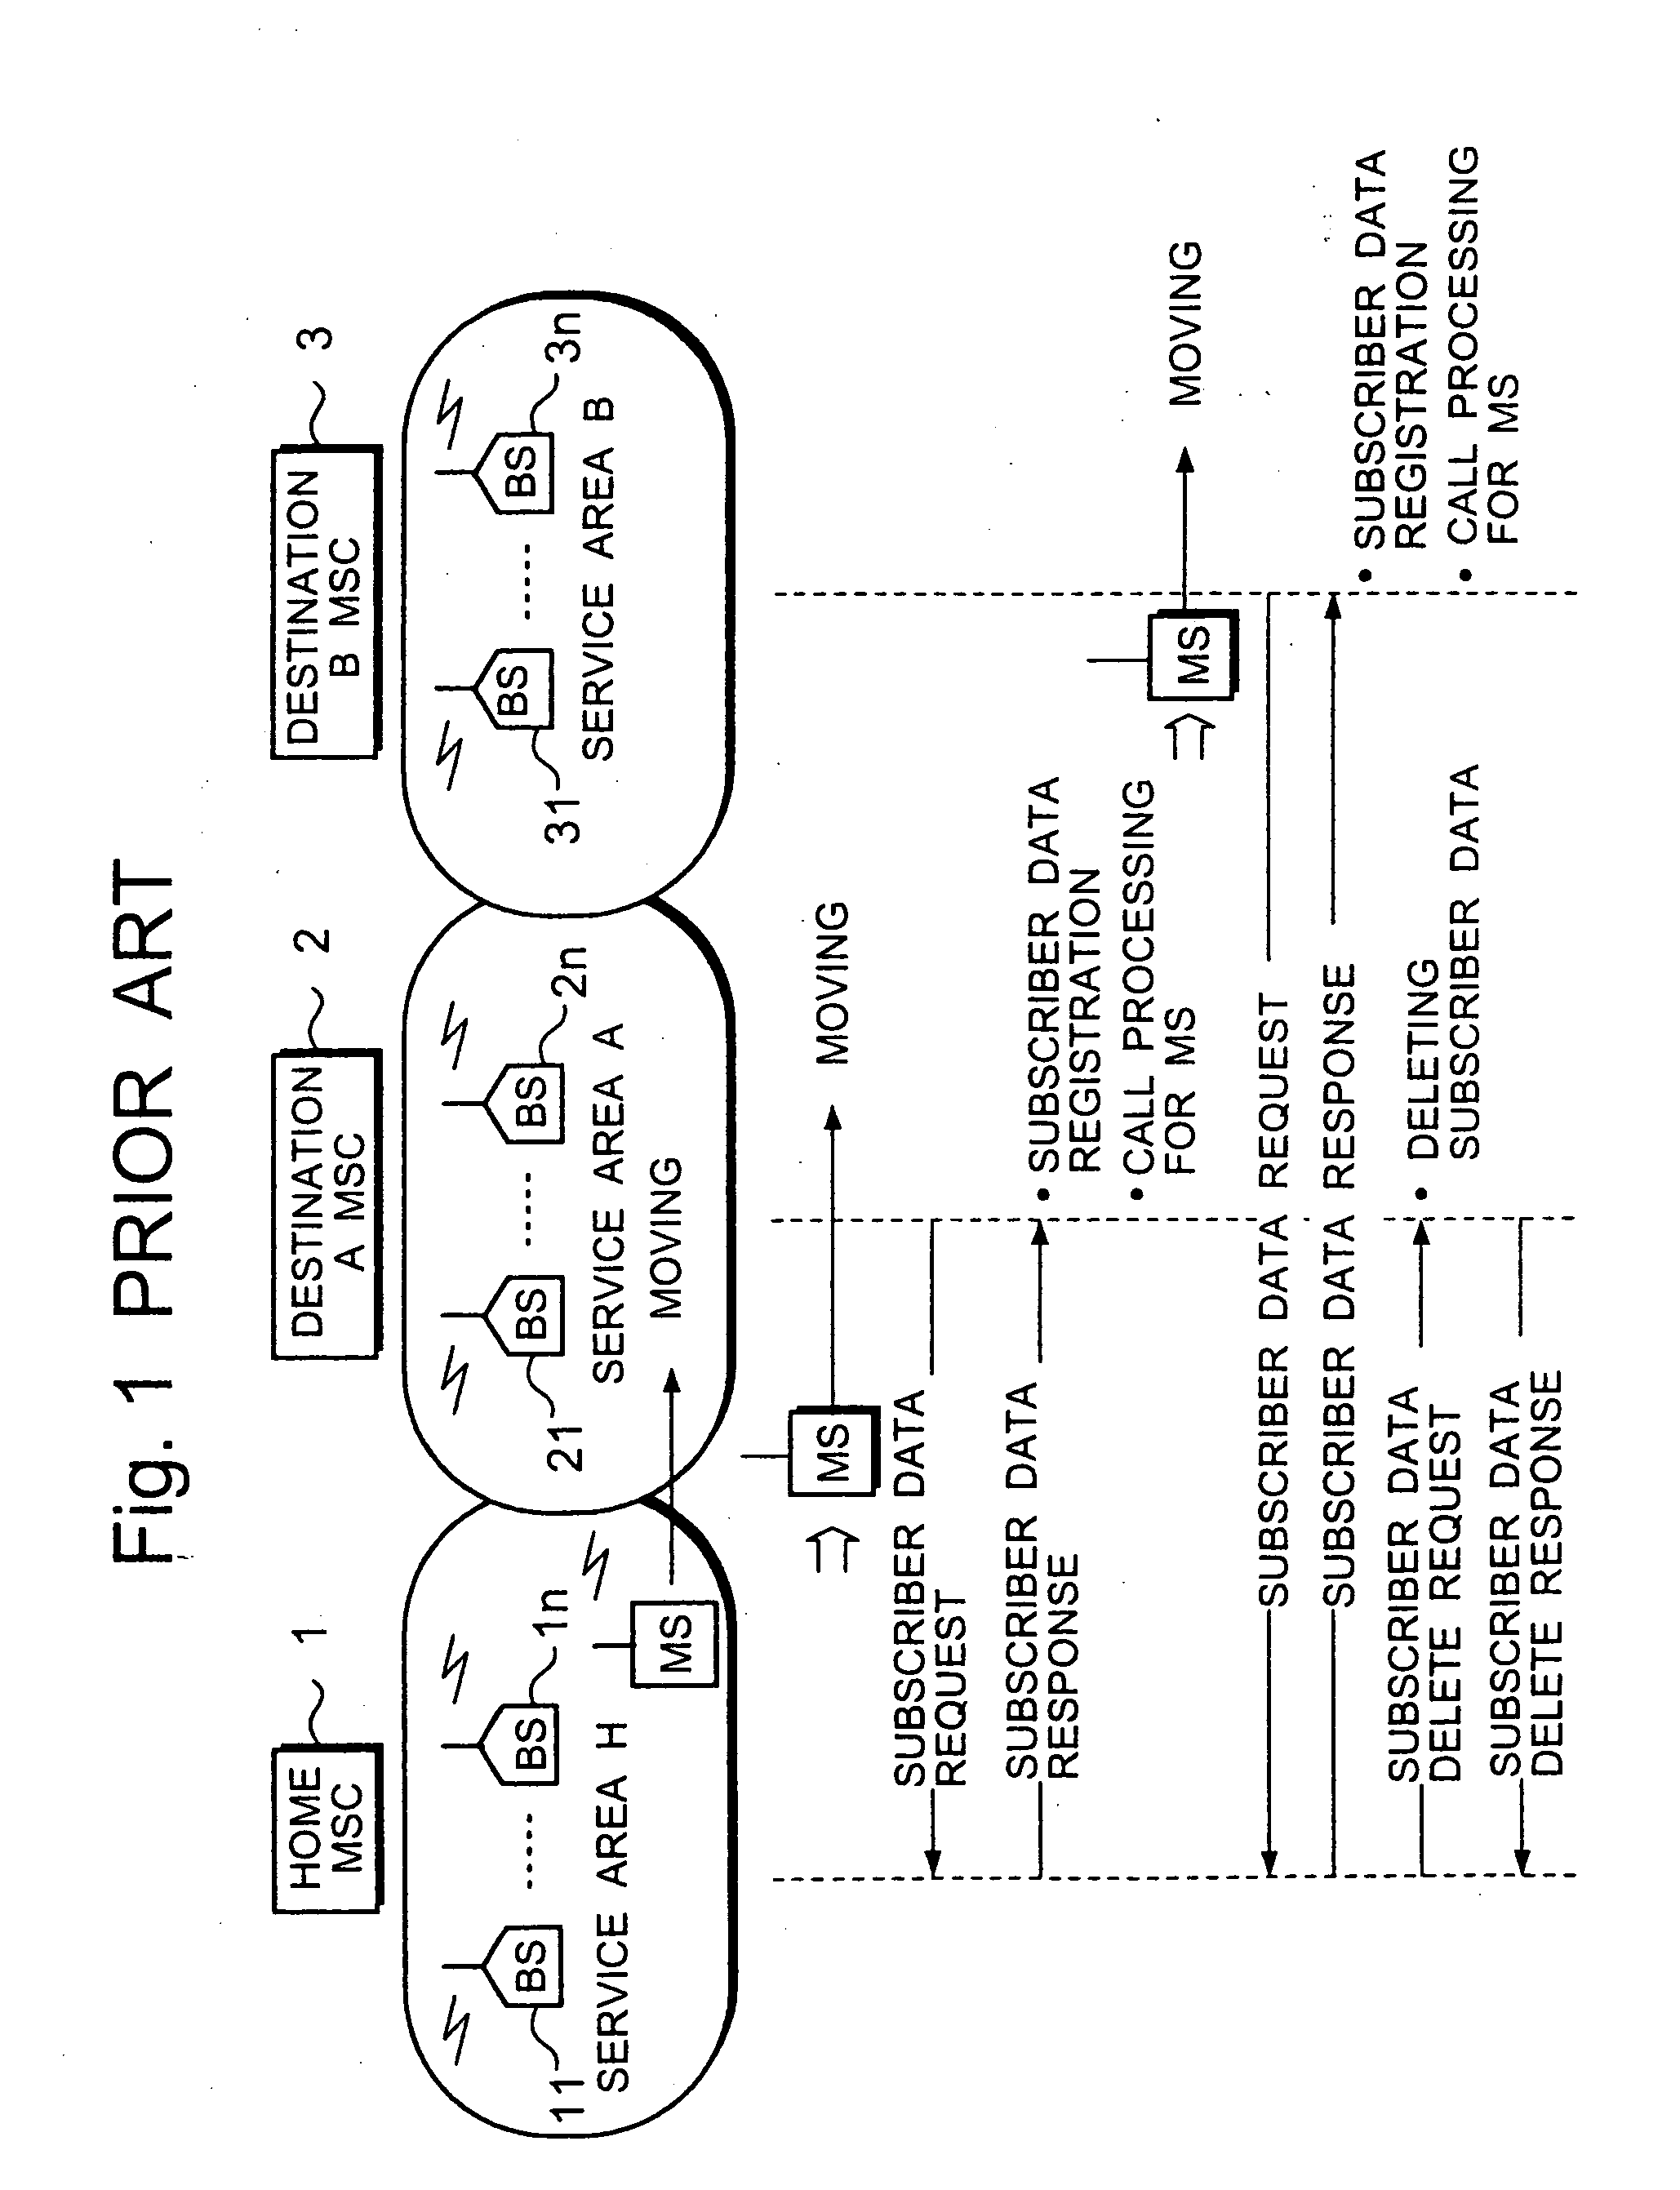 Method of subscriber data control in a mobile communication network